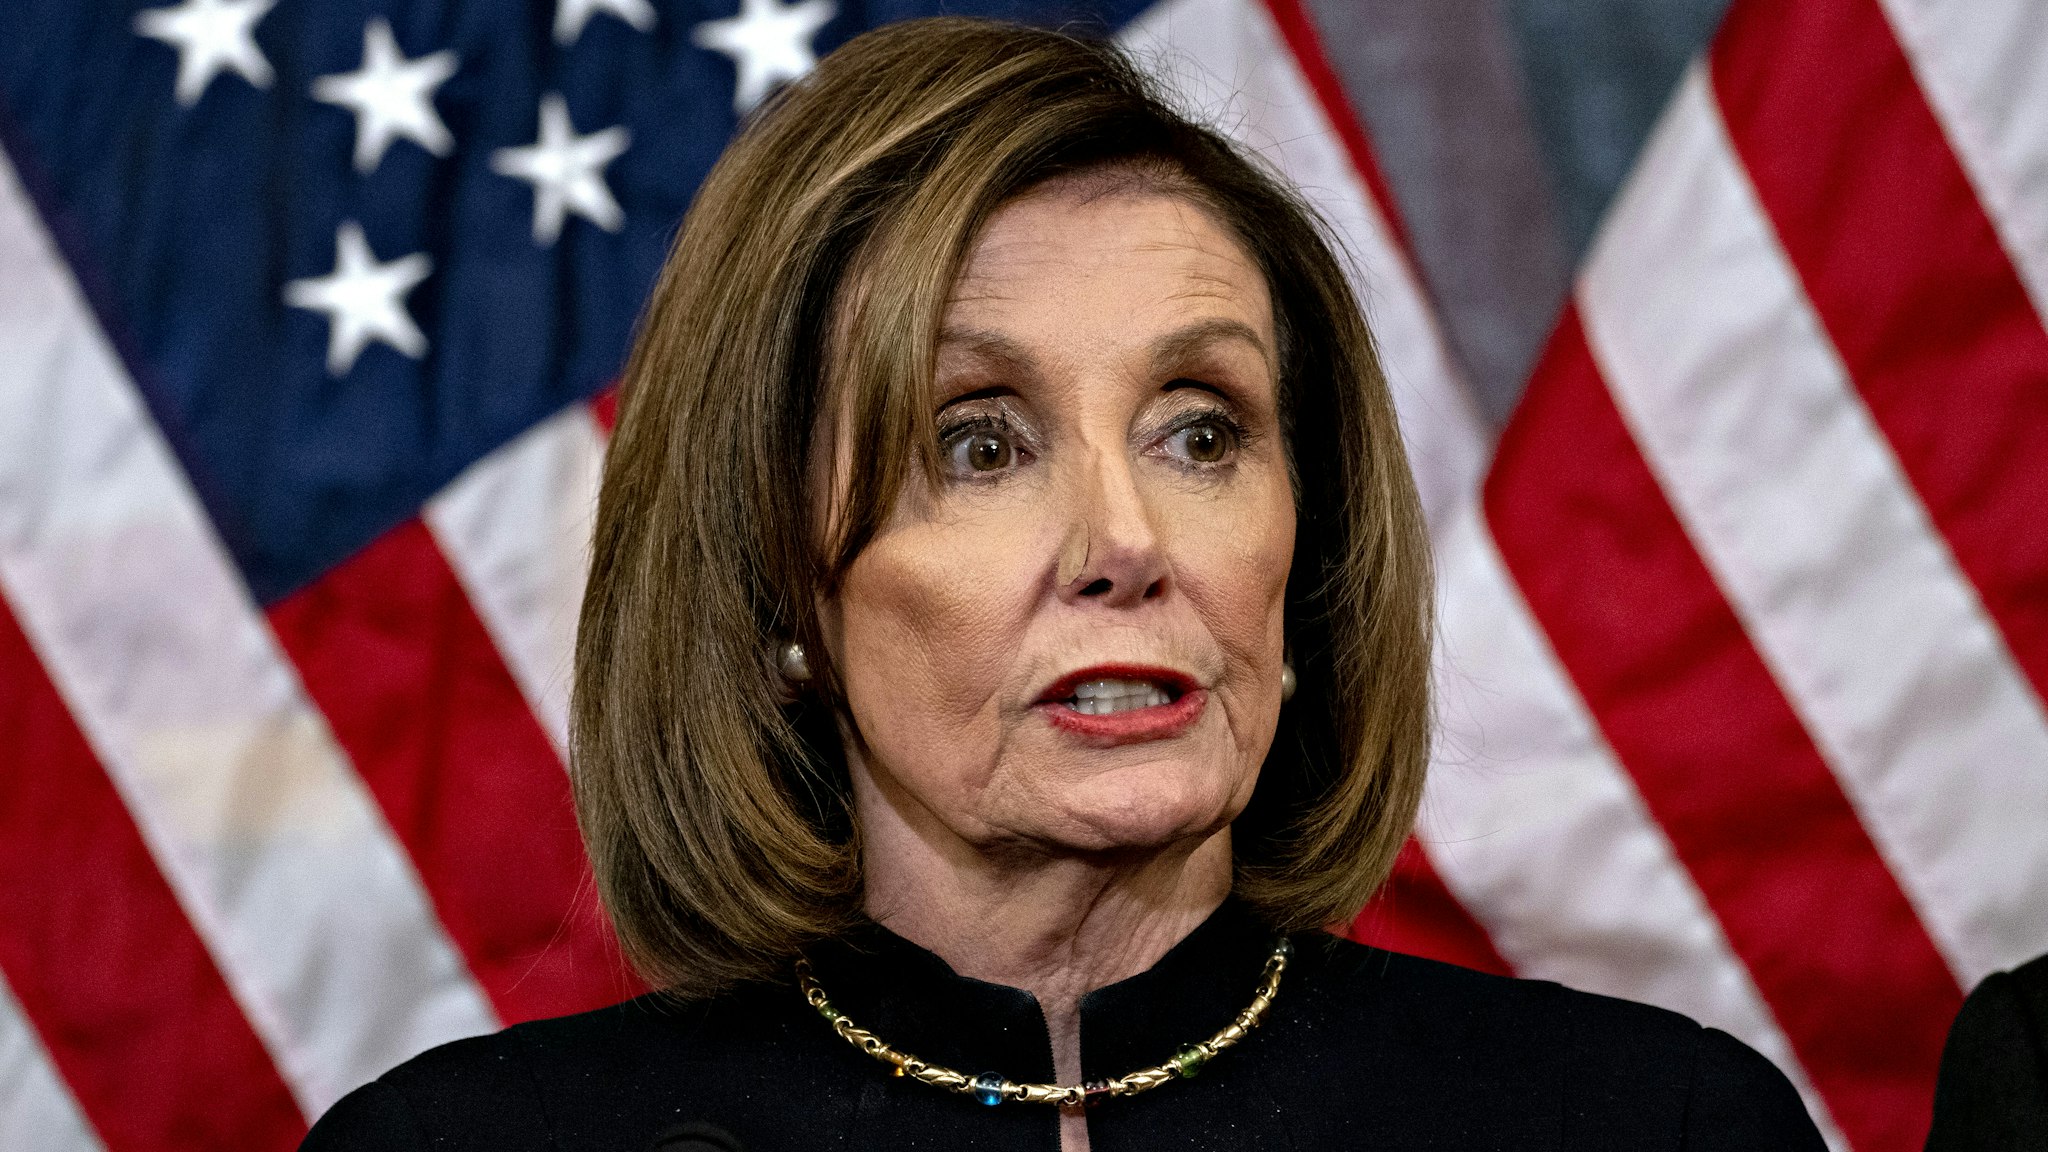 U.S. House Speaker Nancy Pelosi, a Democrat from California, speaks during a news conference after the House voted on articles of impeachment against President Donald Trump at the U.S. Capitol in Washington, D.C., U.S., on Wednesday, Dec. 18, 2019. The U.S. House of Representatives impeached Trump on charges of abuse of power and obstructing Congress, the culmination of an effort by Democrats that further inflamed partisan tensions in Washington and deepened the nations ideological divide.